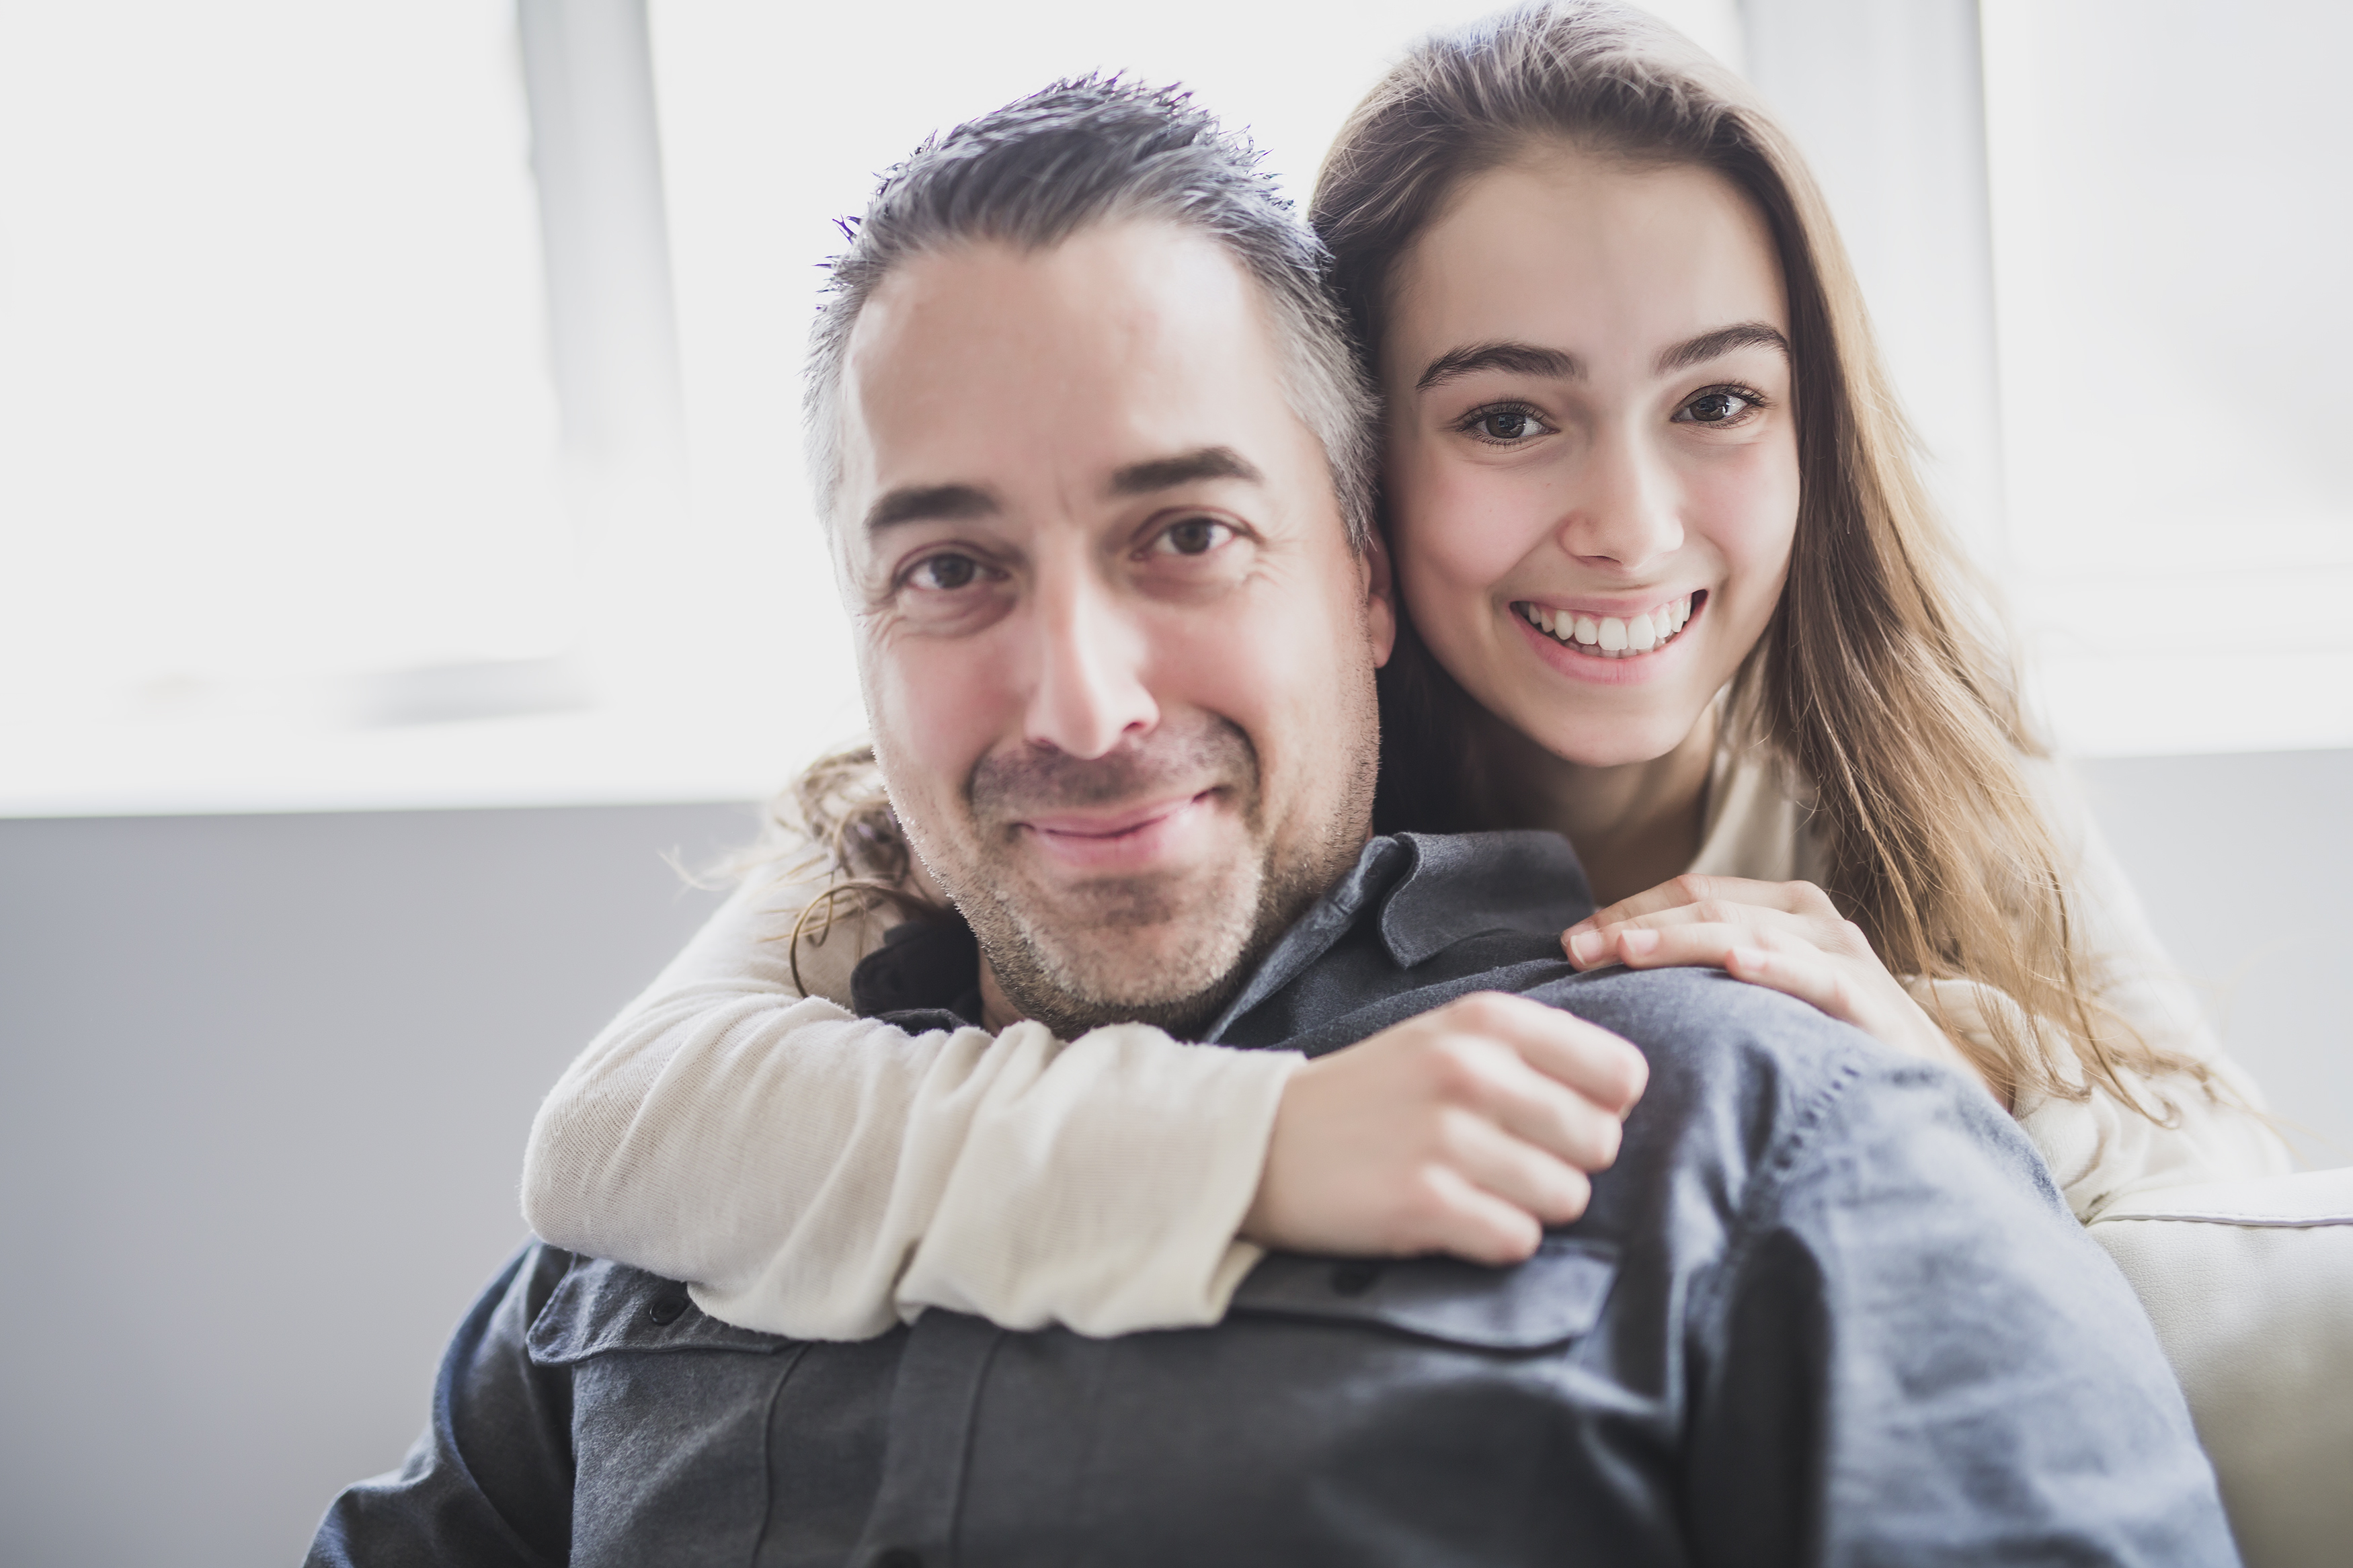 A young girl with an older man | Source: Shutterstock